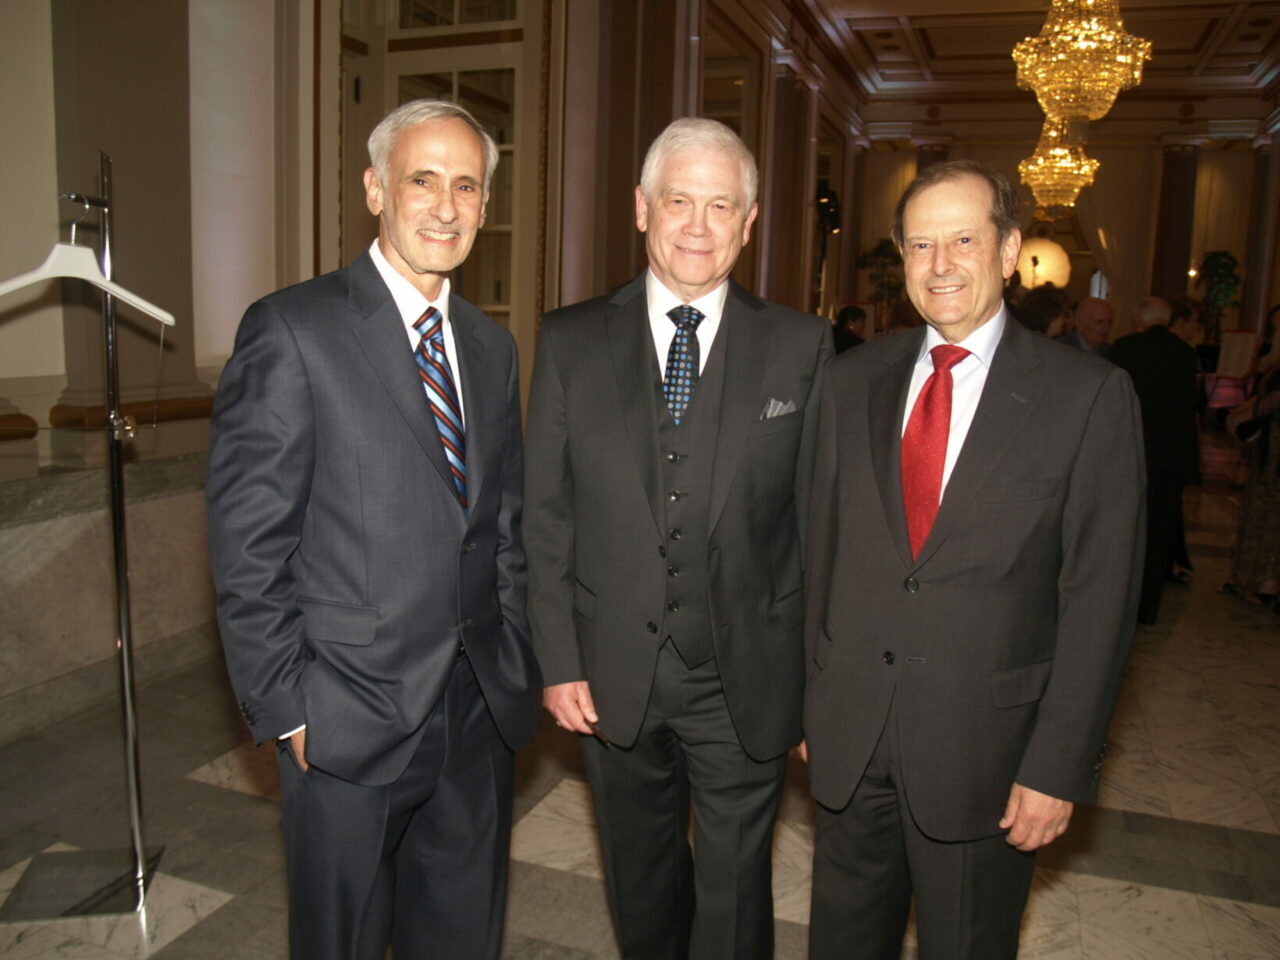 Michael Farber, Honoree, Dave Hodge, evening MC  and Dr. Saul Frenkiel, event Chair (Photo: Jack Gurevitch)